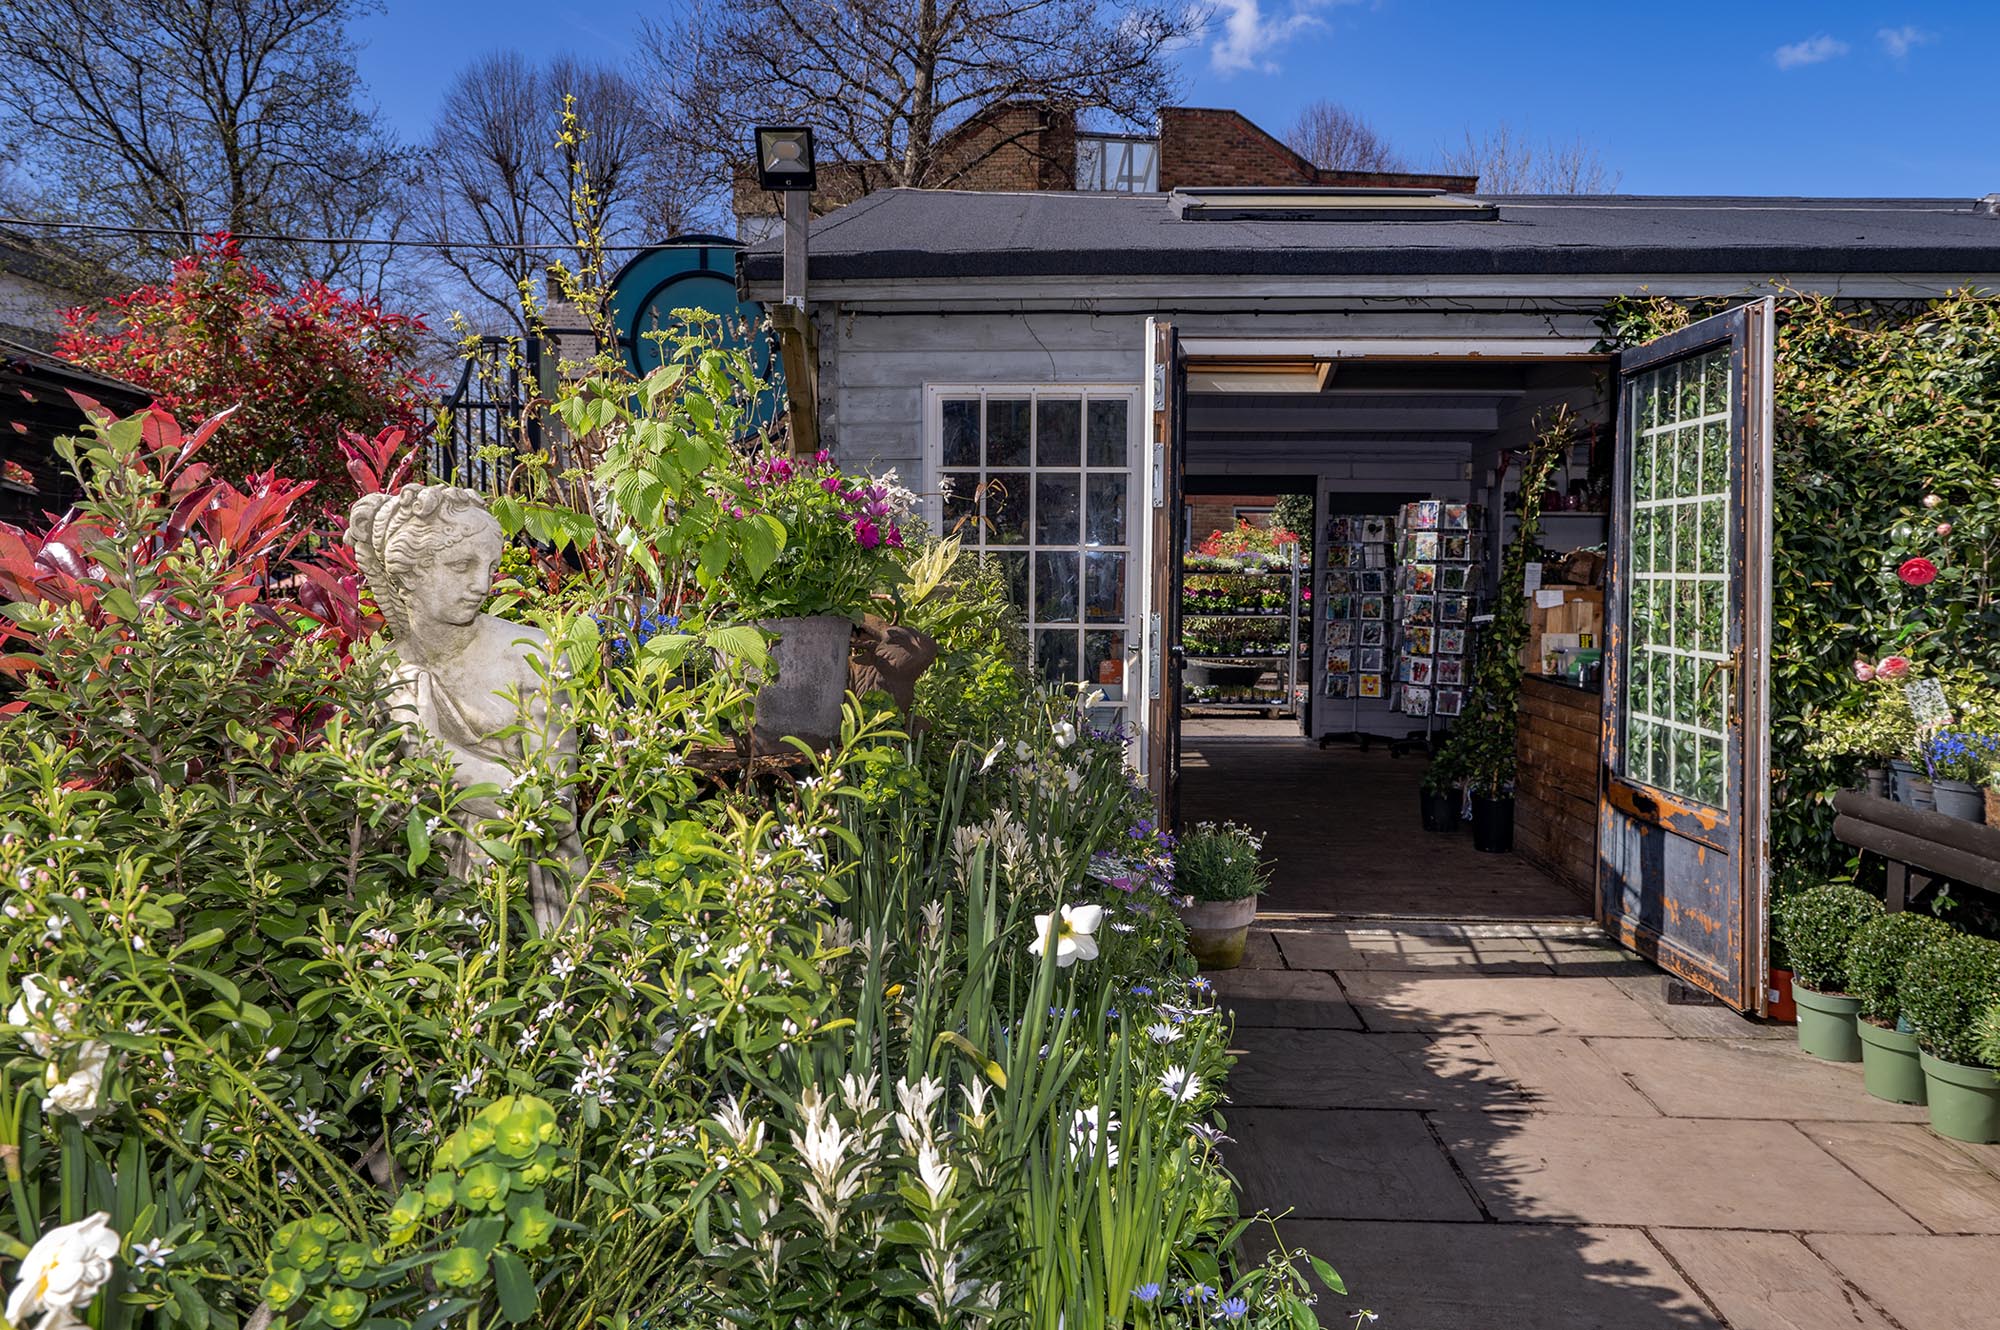 W6 Garden Centre and Café: Spring Is In The Air